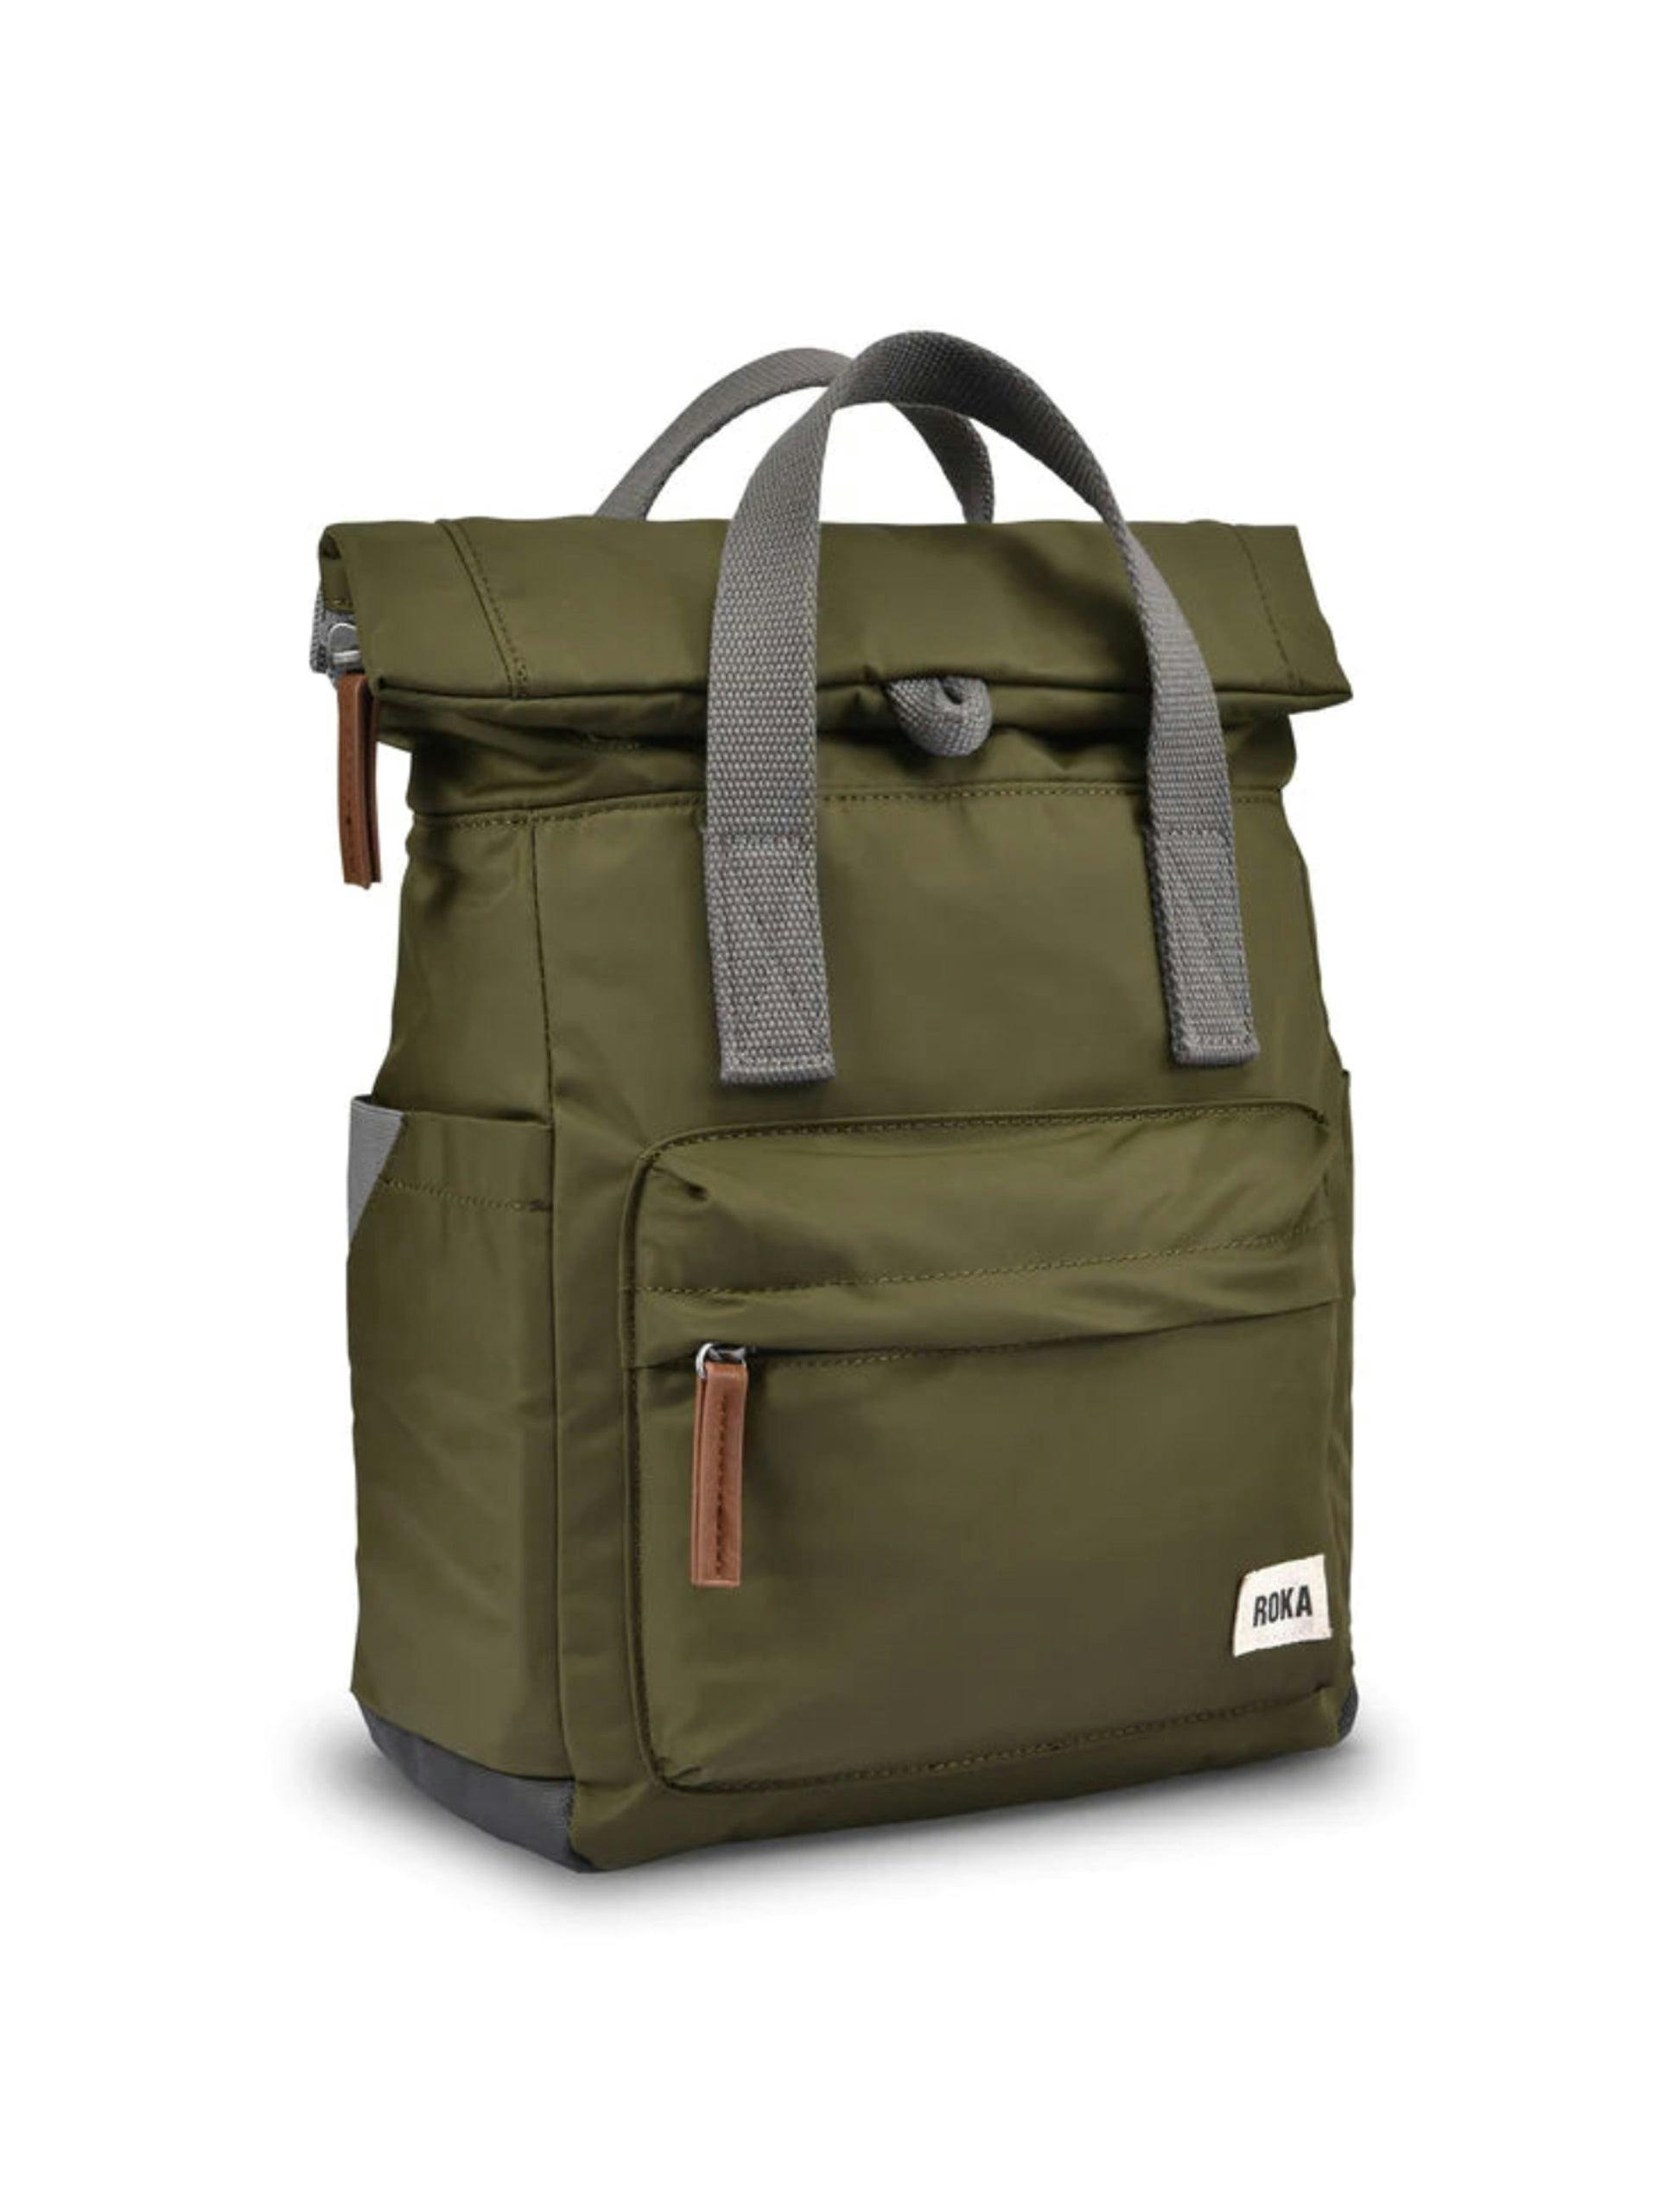 Green roll top backpack